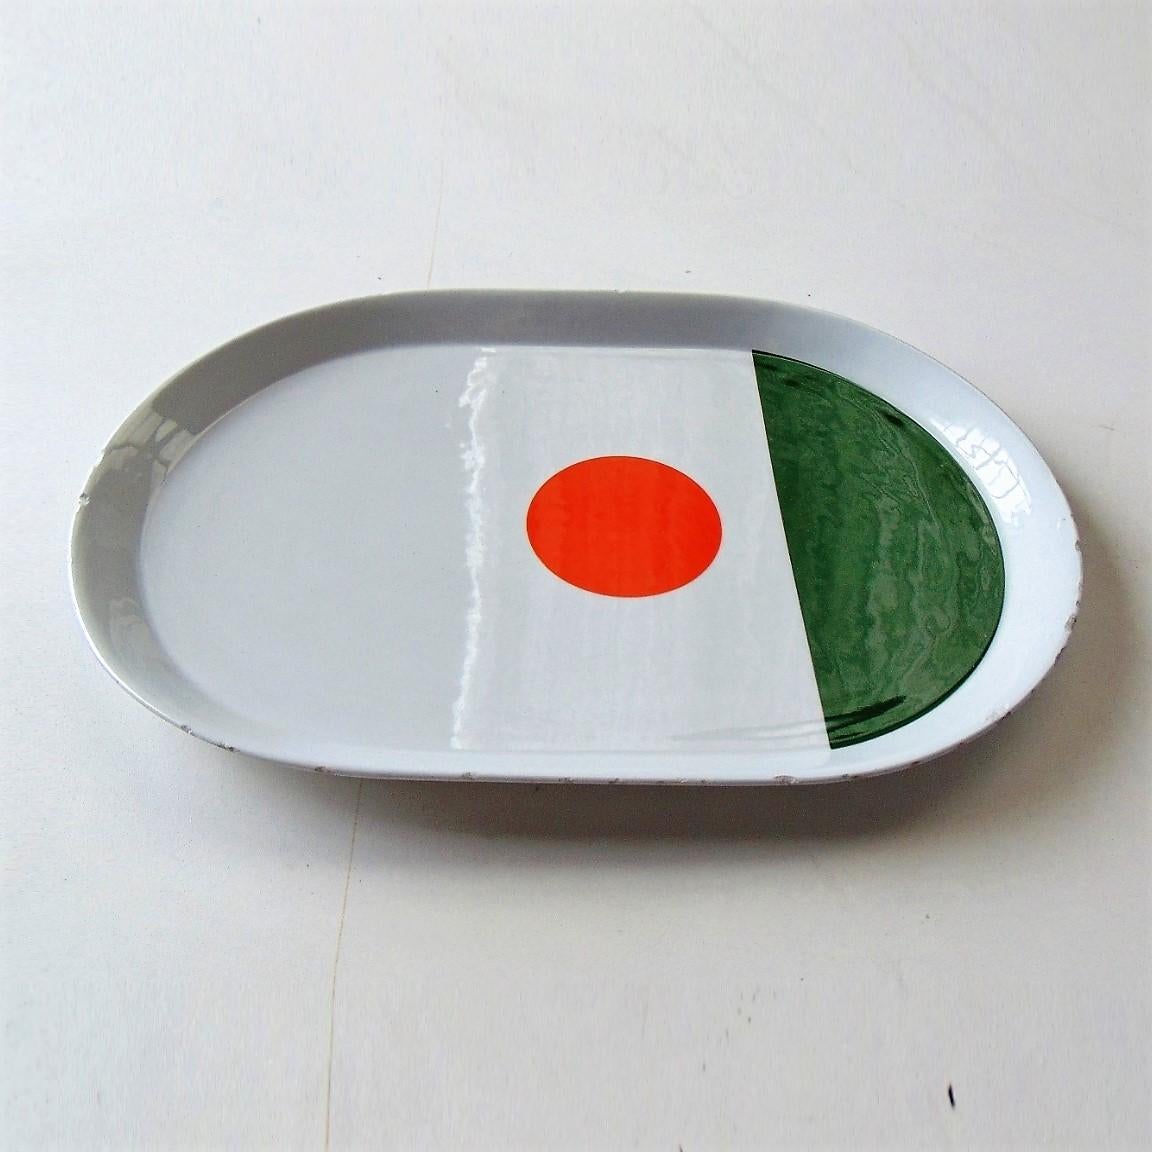 Original 1967 glazed porcelain serving plate by Gio Ponti. He designed this series for the Italian ceramic manufacturer Franco Pozzi. A mentor and friend of Luigi Sormani, owner of the Sormani Company, Gio Ponti gave this plate to the Sormani family